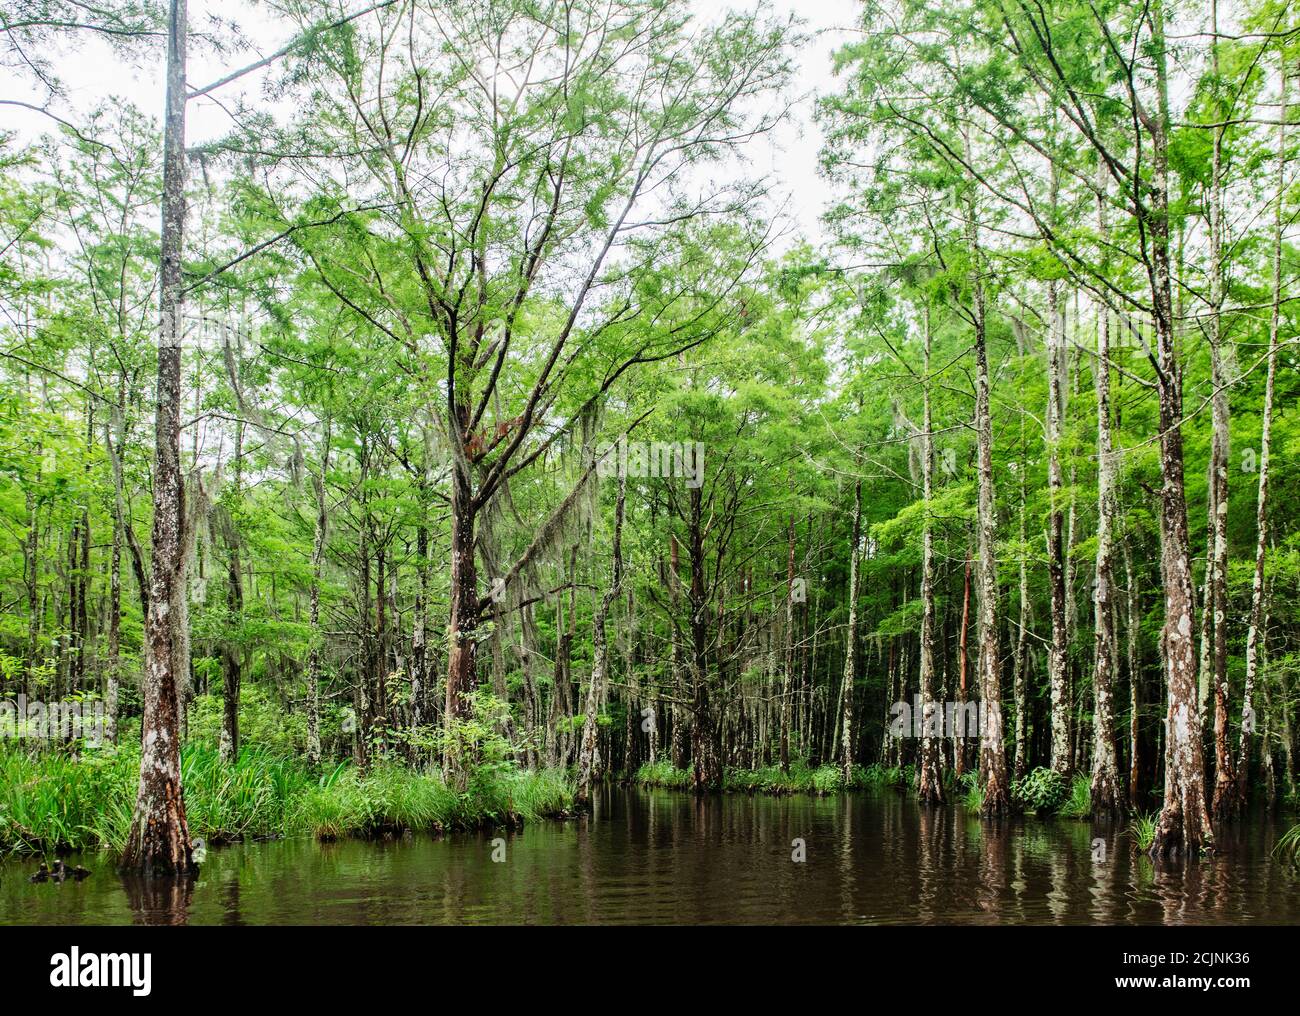 Swamp land in New Orleans, Louisiana, United States Stock Photo